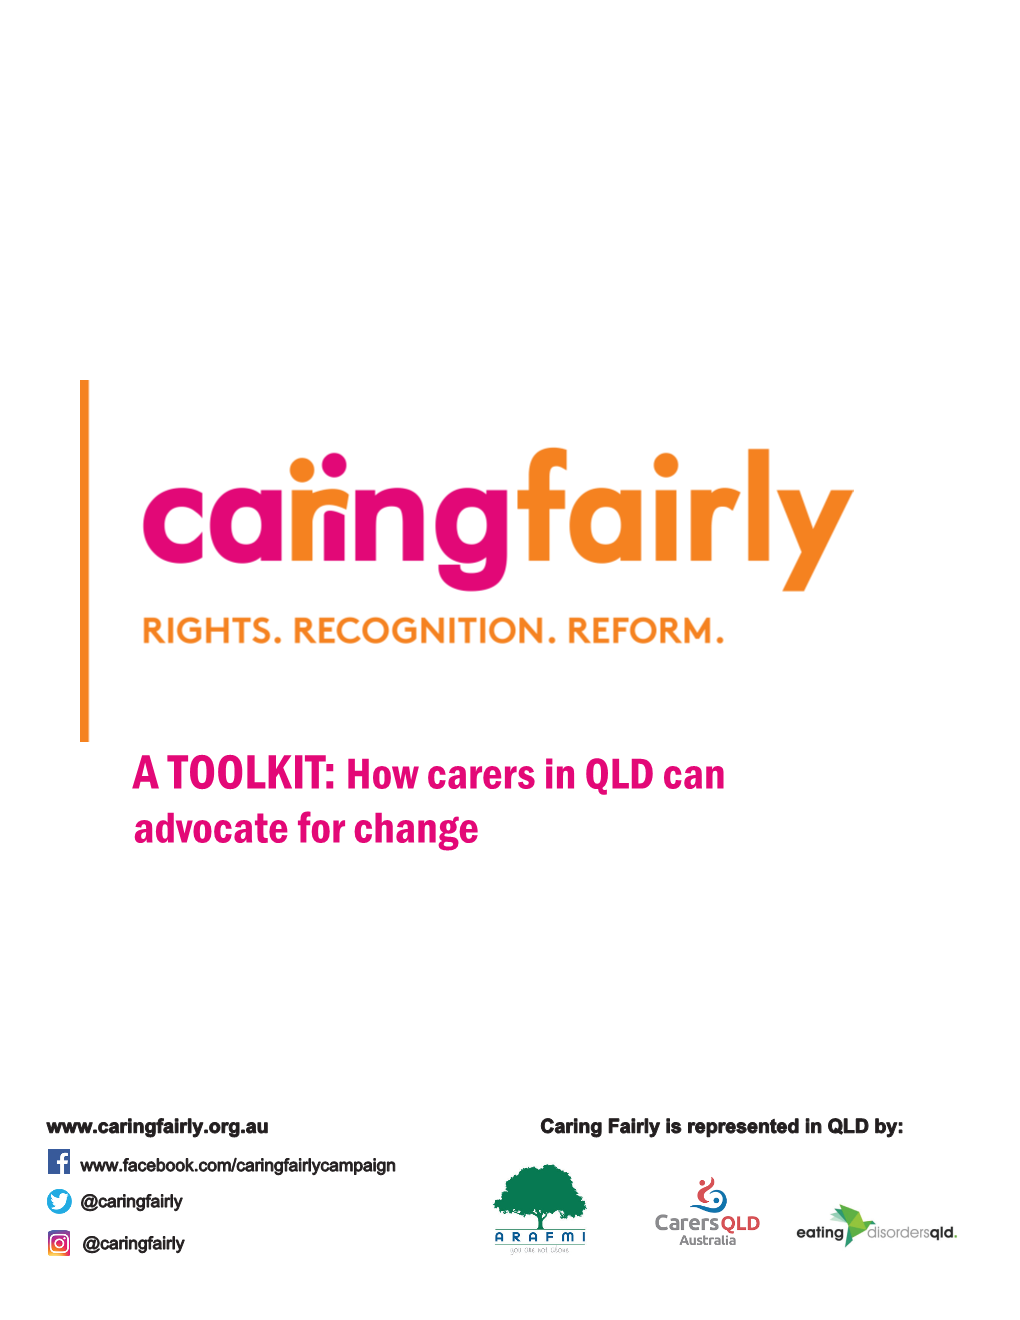 A TOOLKIT: How Carers in QLD Can Advocate for Change